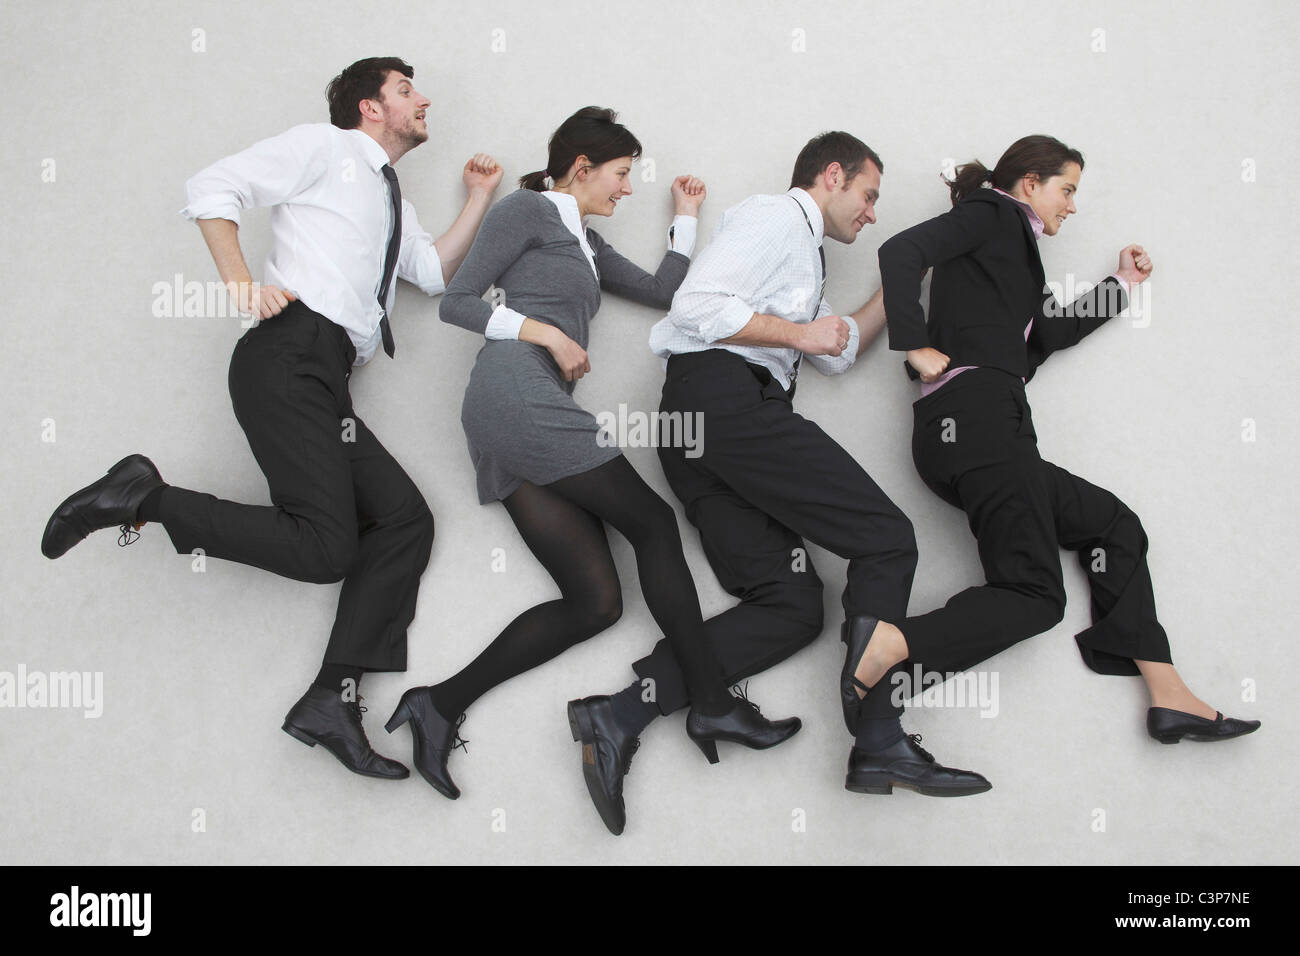 Office workers in a line, side view, portrait, elevated view Stock Photo